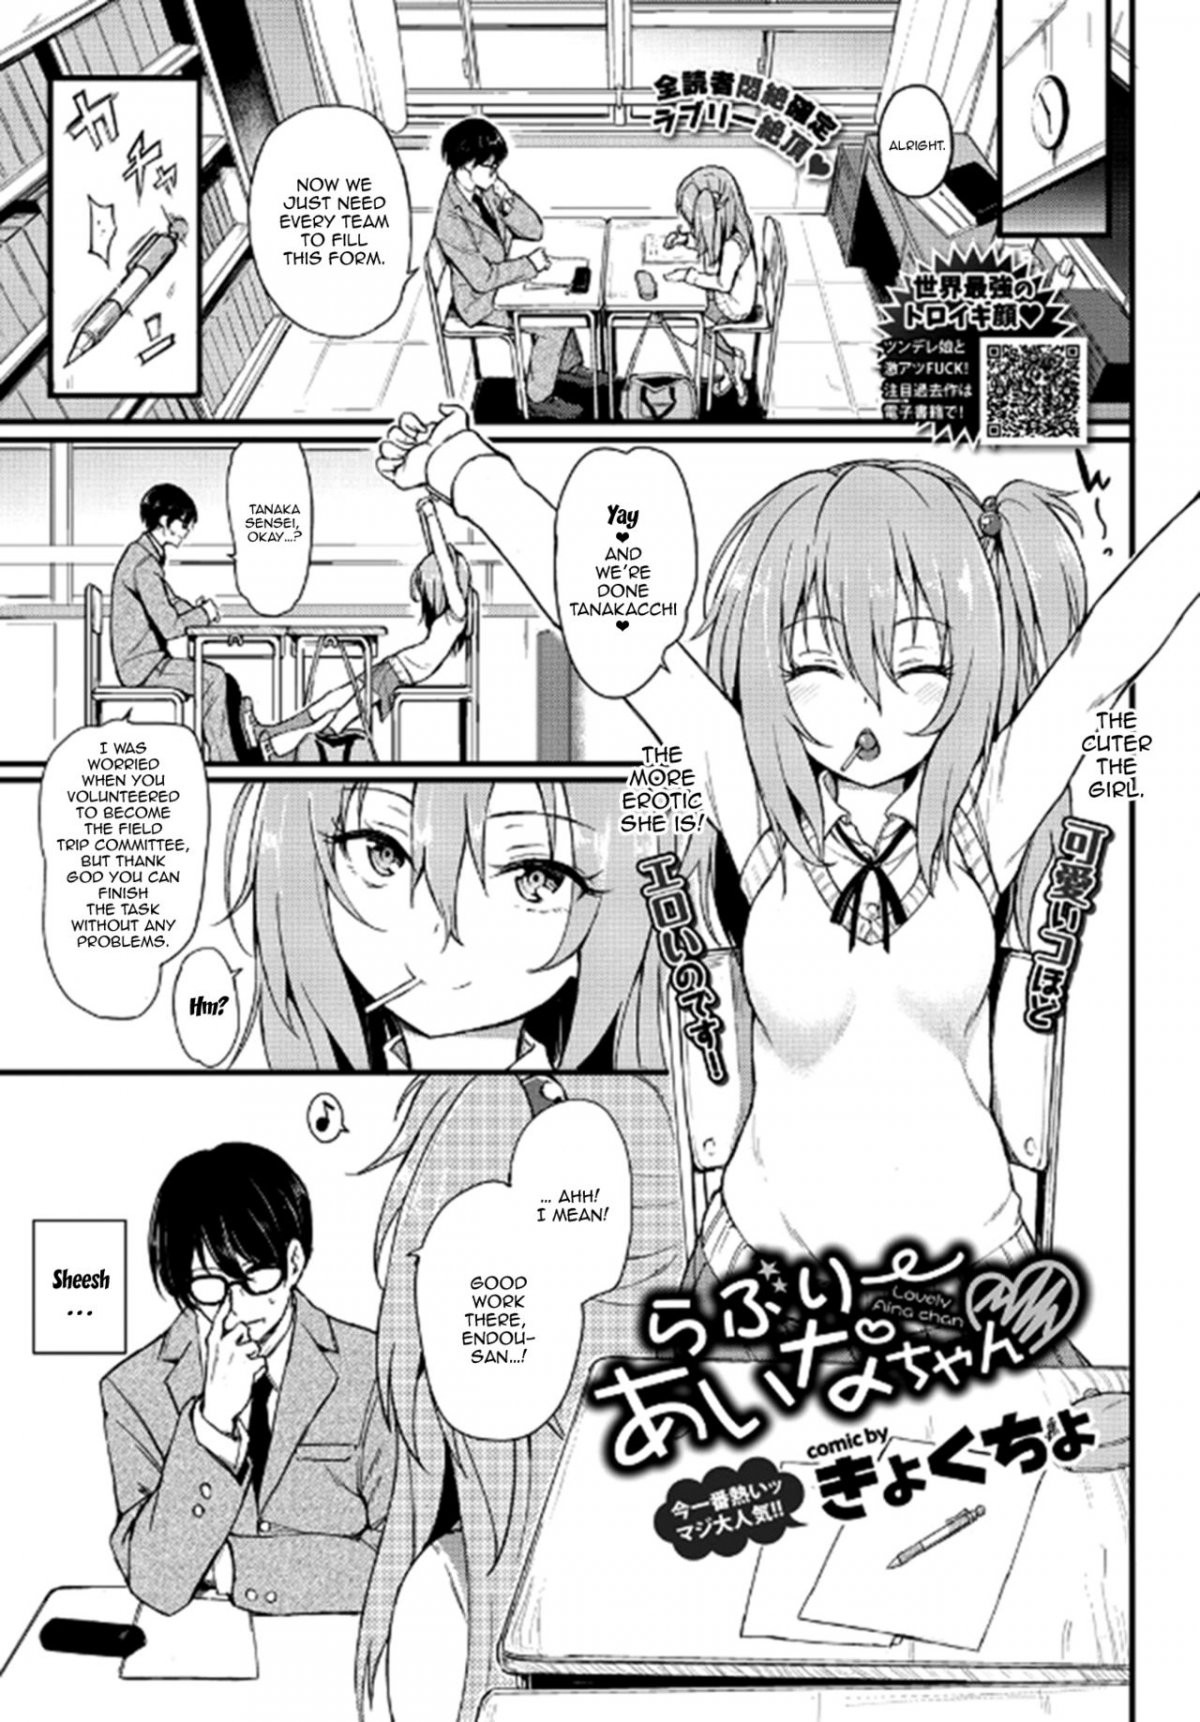 Lovely Aina-chan – Chapter 1